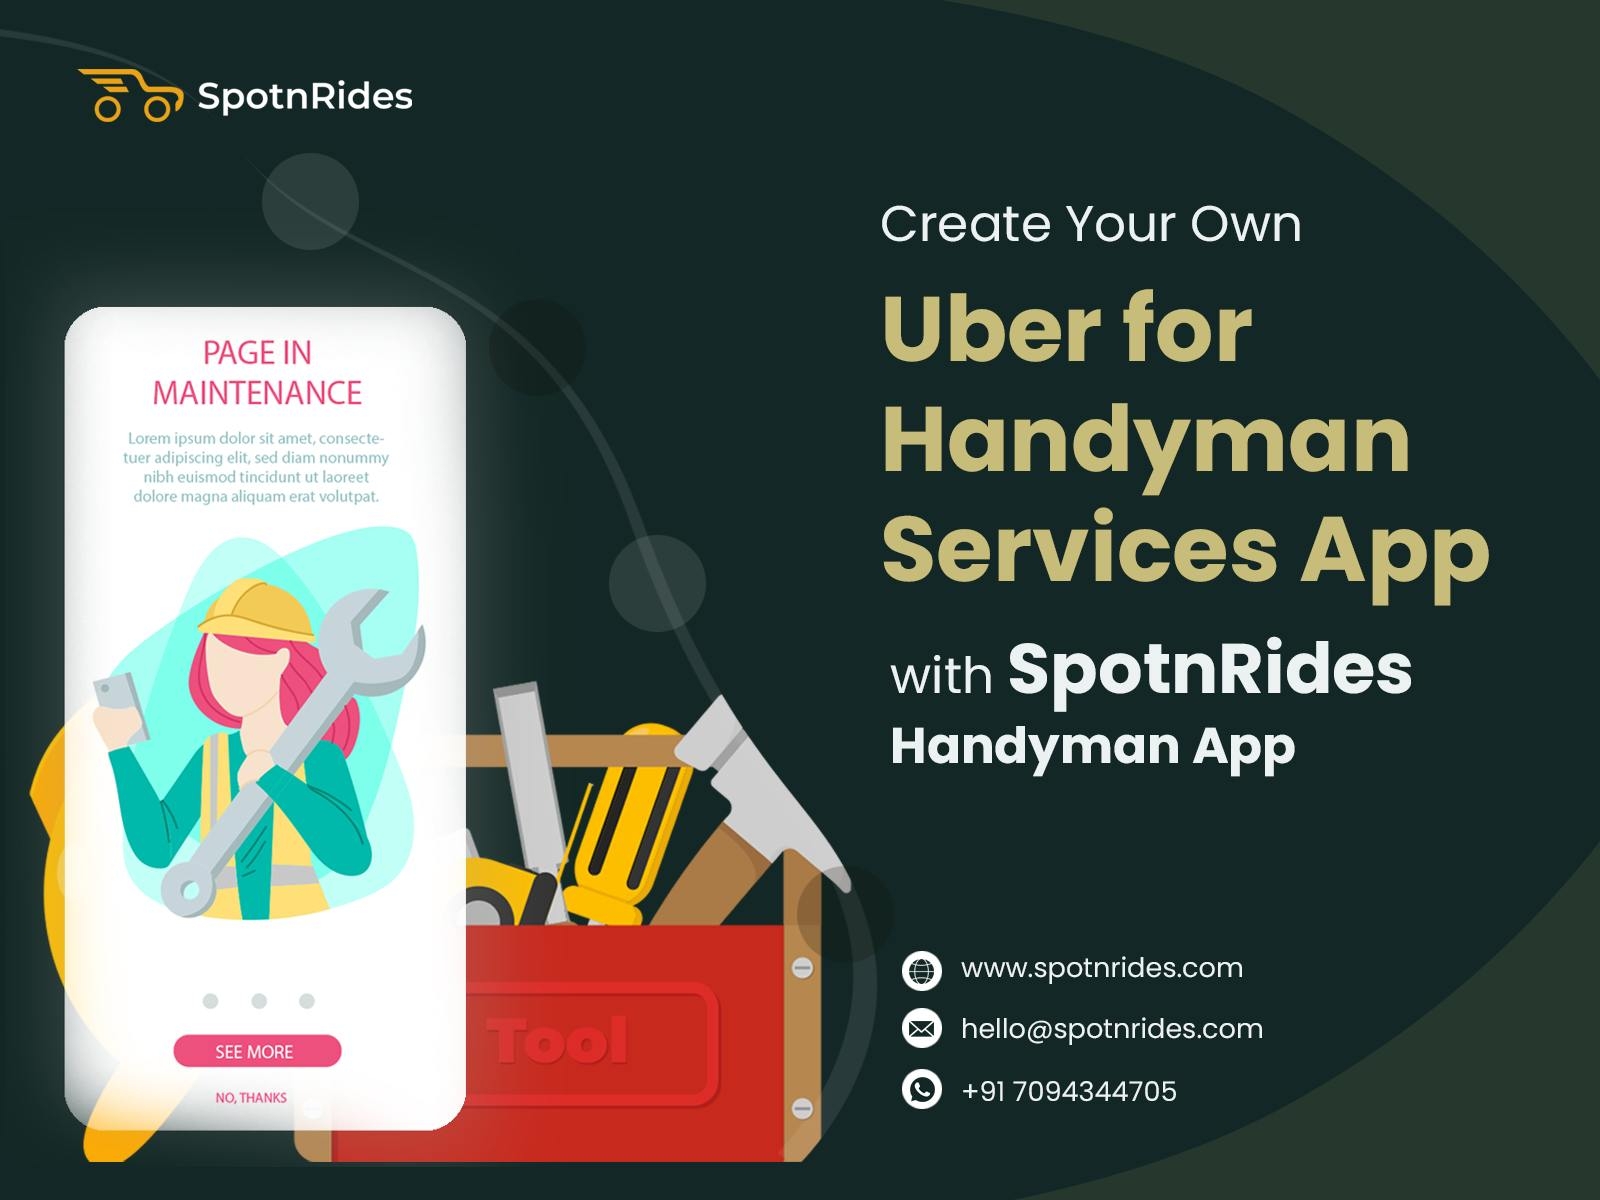  Looking for handyman service management software for your business?